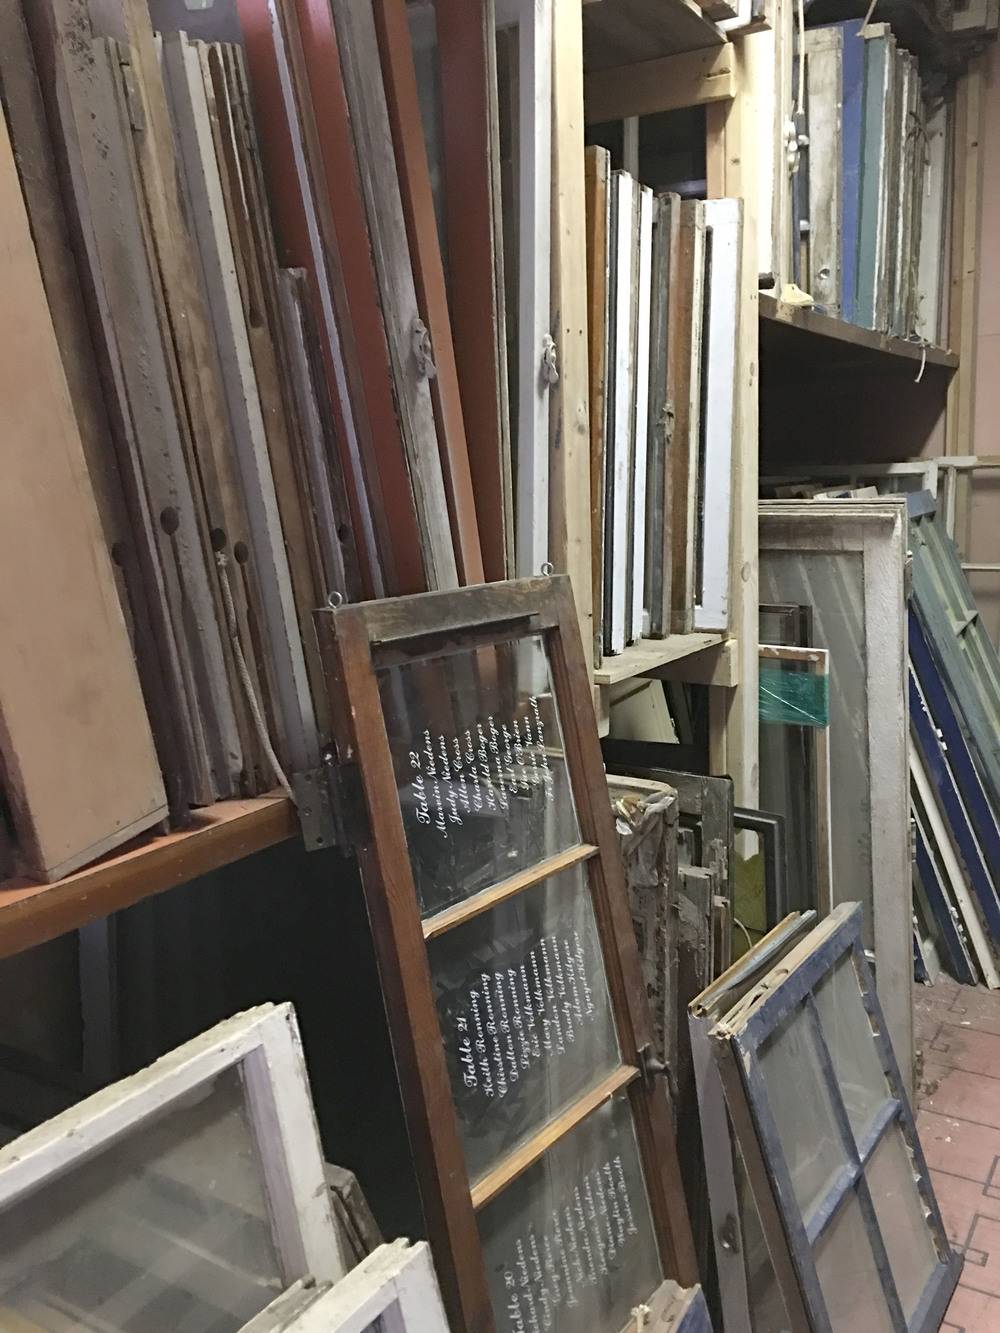 Why everyone should check out their local salvage store